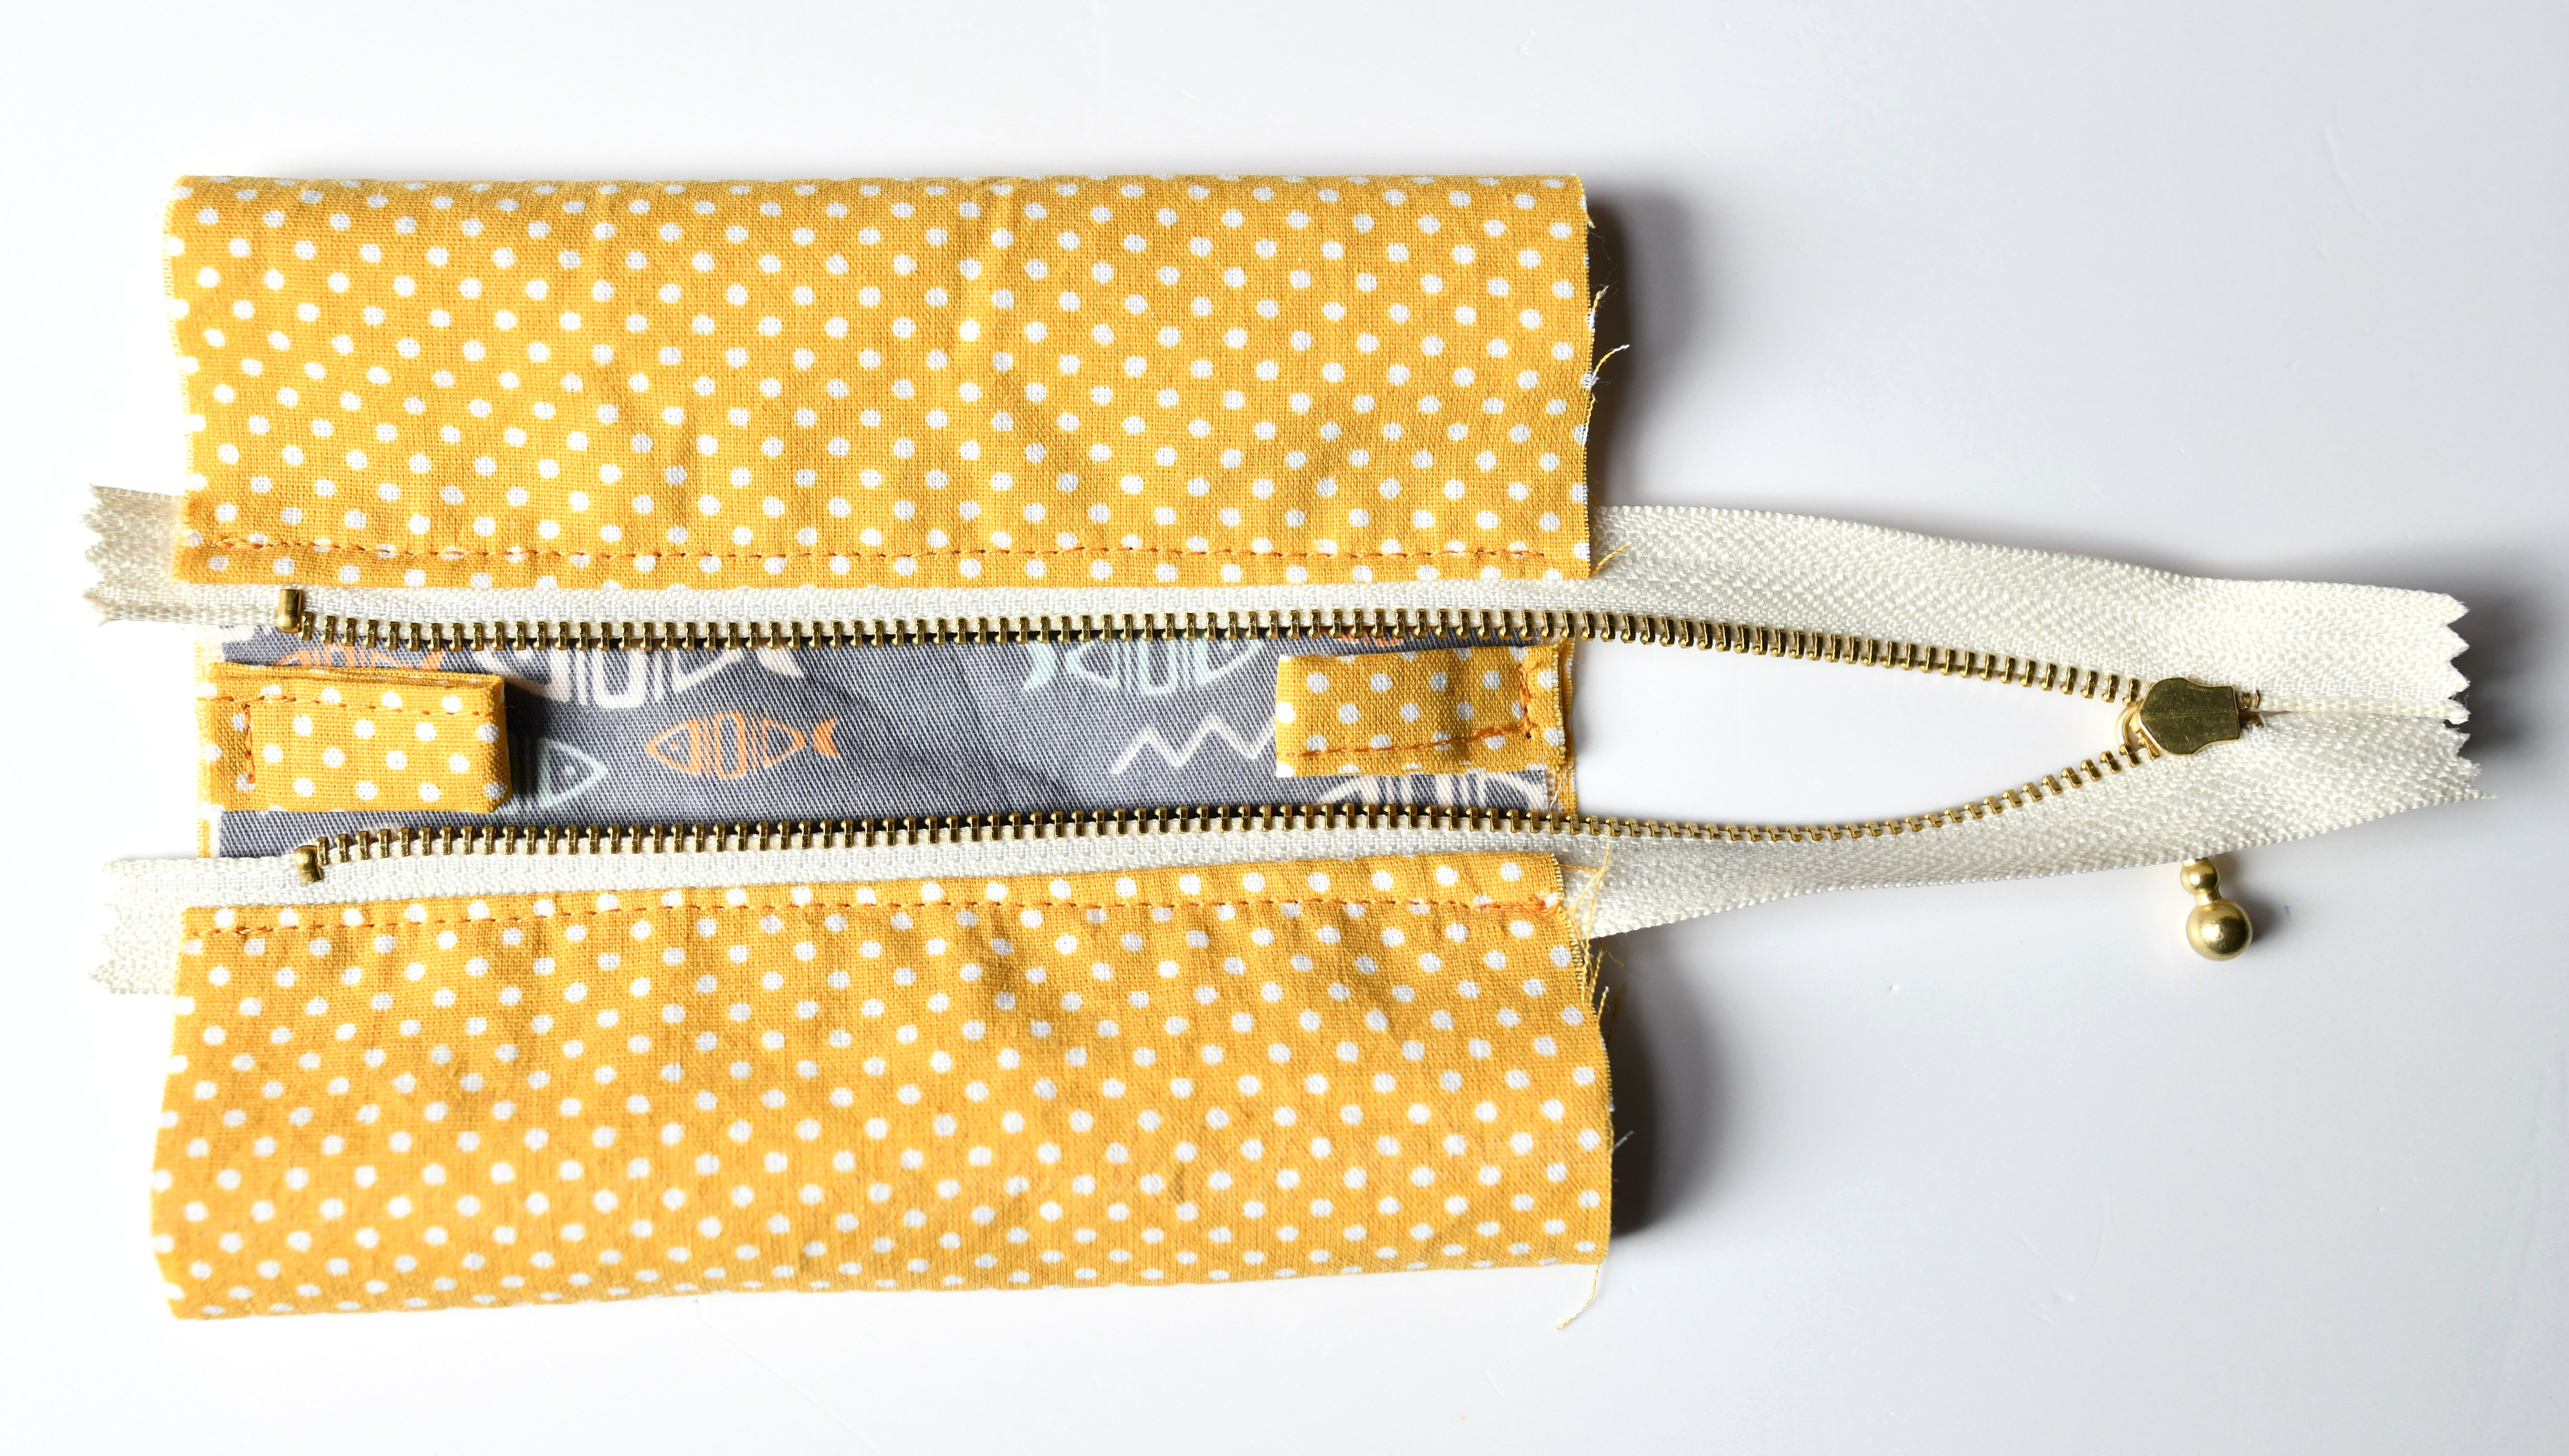 Easy 10-minute No Zipper Pouch : 11 Steps (with Pictures) - Instructables